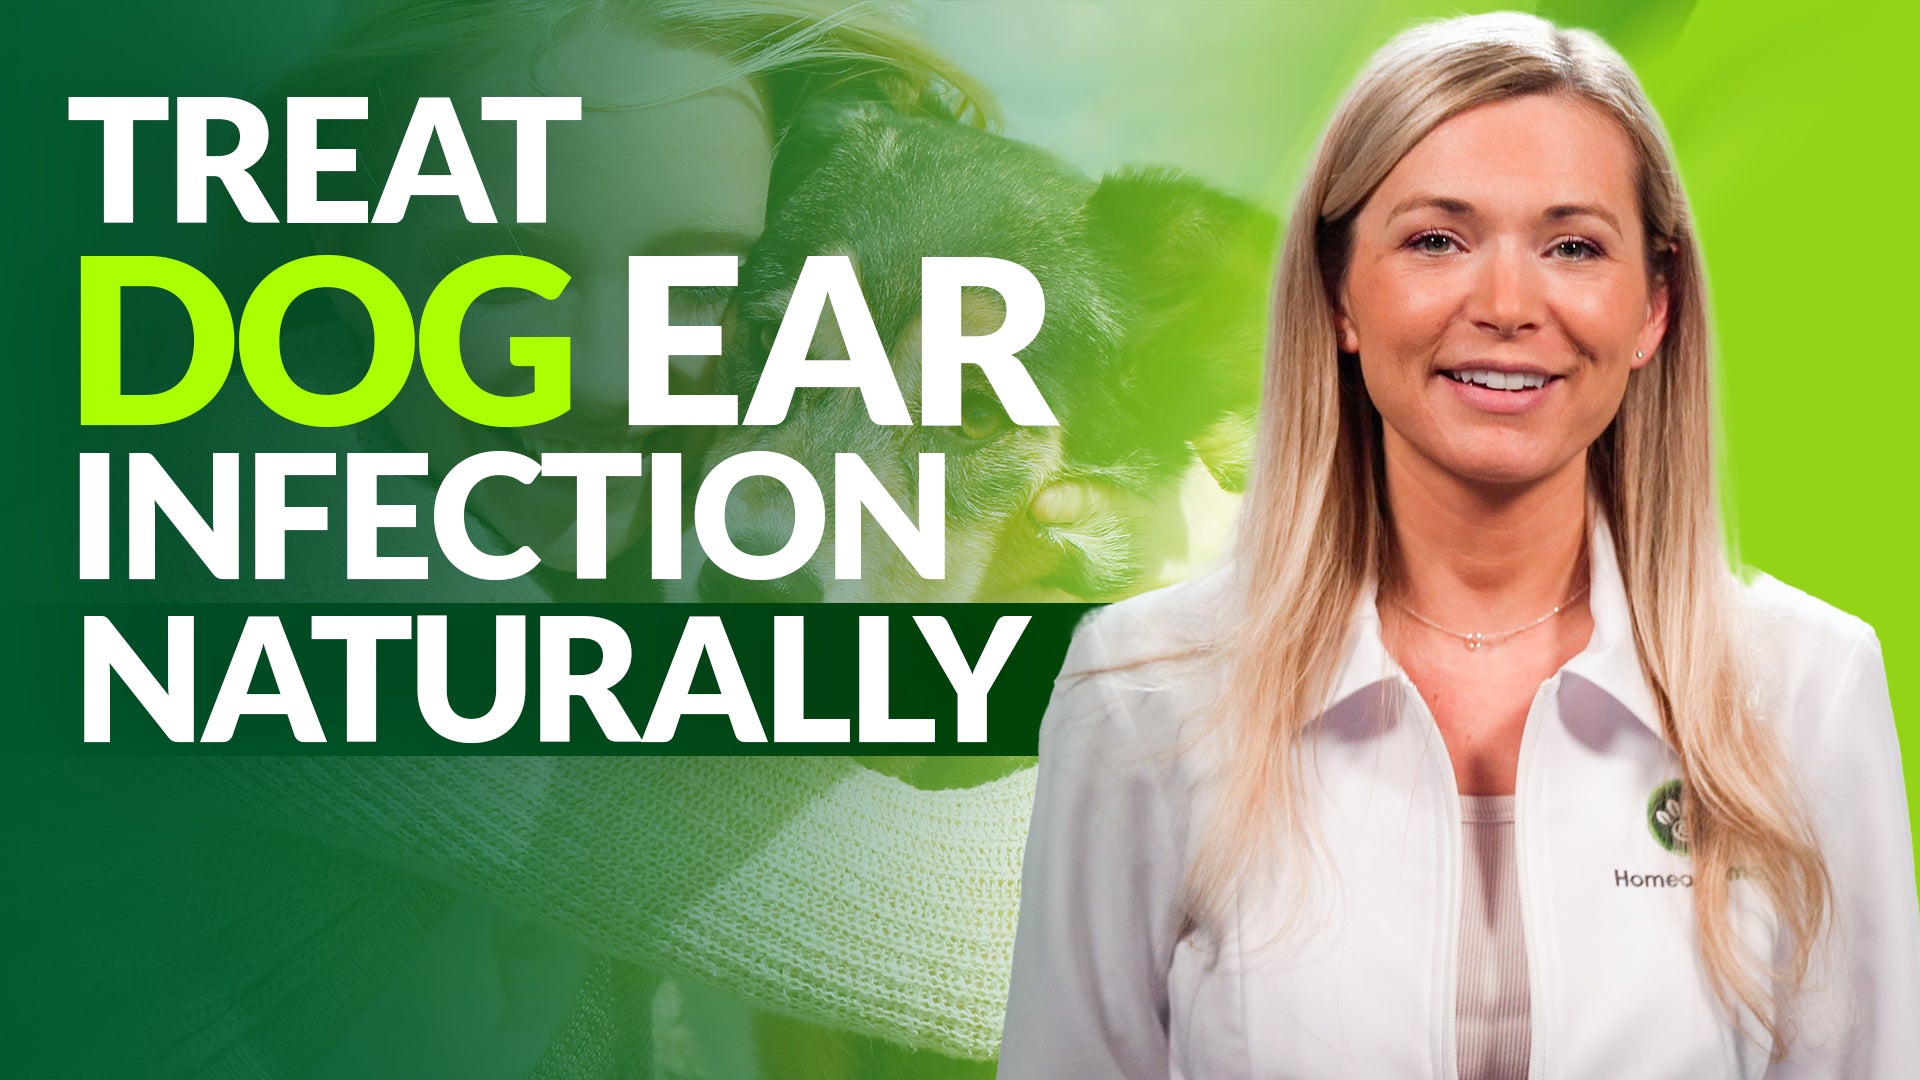 Treat dog ear infections naturally | HERE’S THE RIGHT WAY!